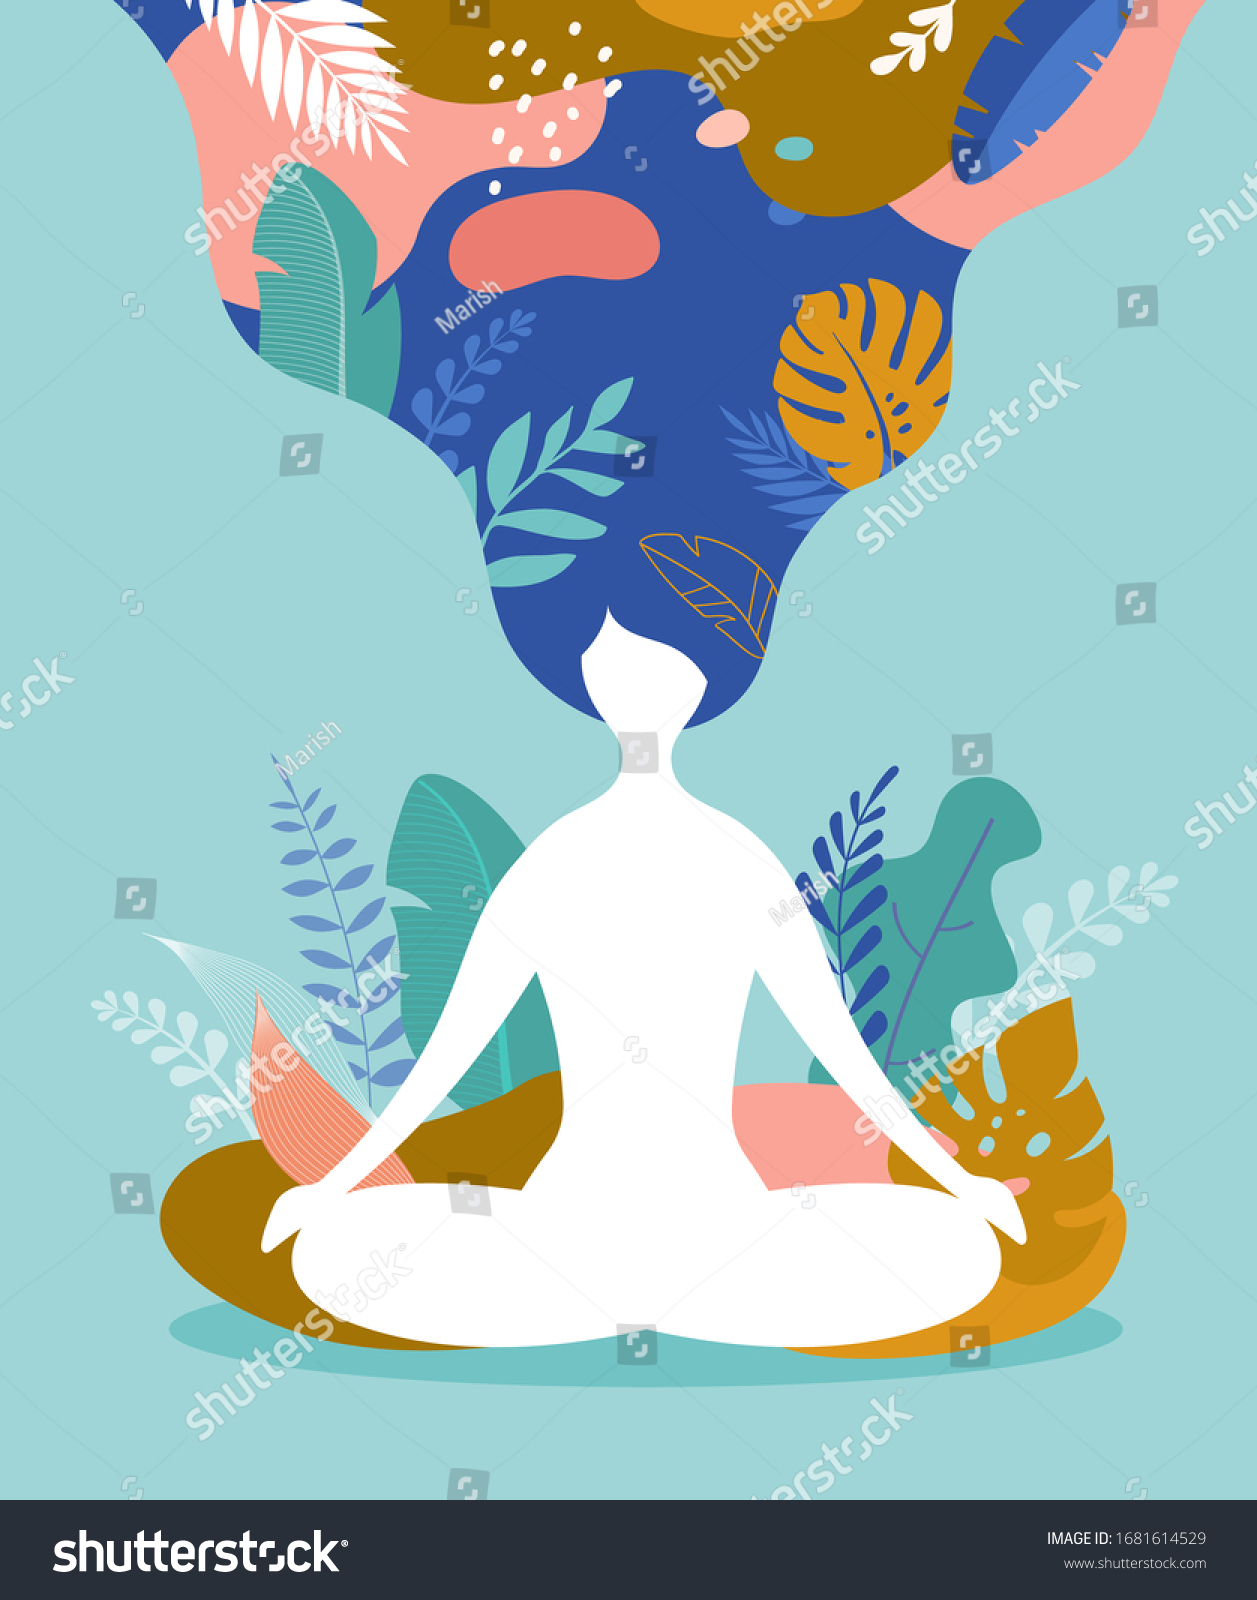 SVG of Coping with stress and anxiety using mindfulness, meditation and yoga. Vector background in pastel vintage colors with a woman sitting cross-legged and meditating. Vector illustration svg